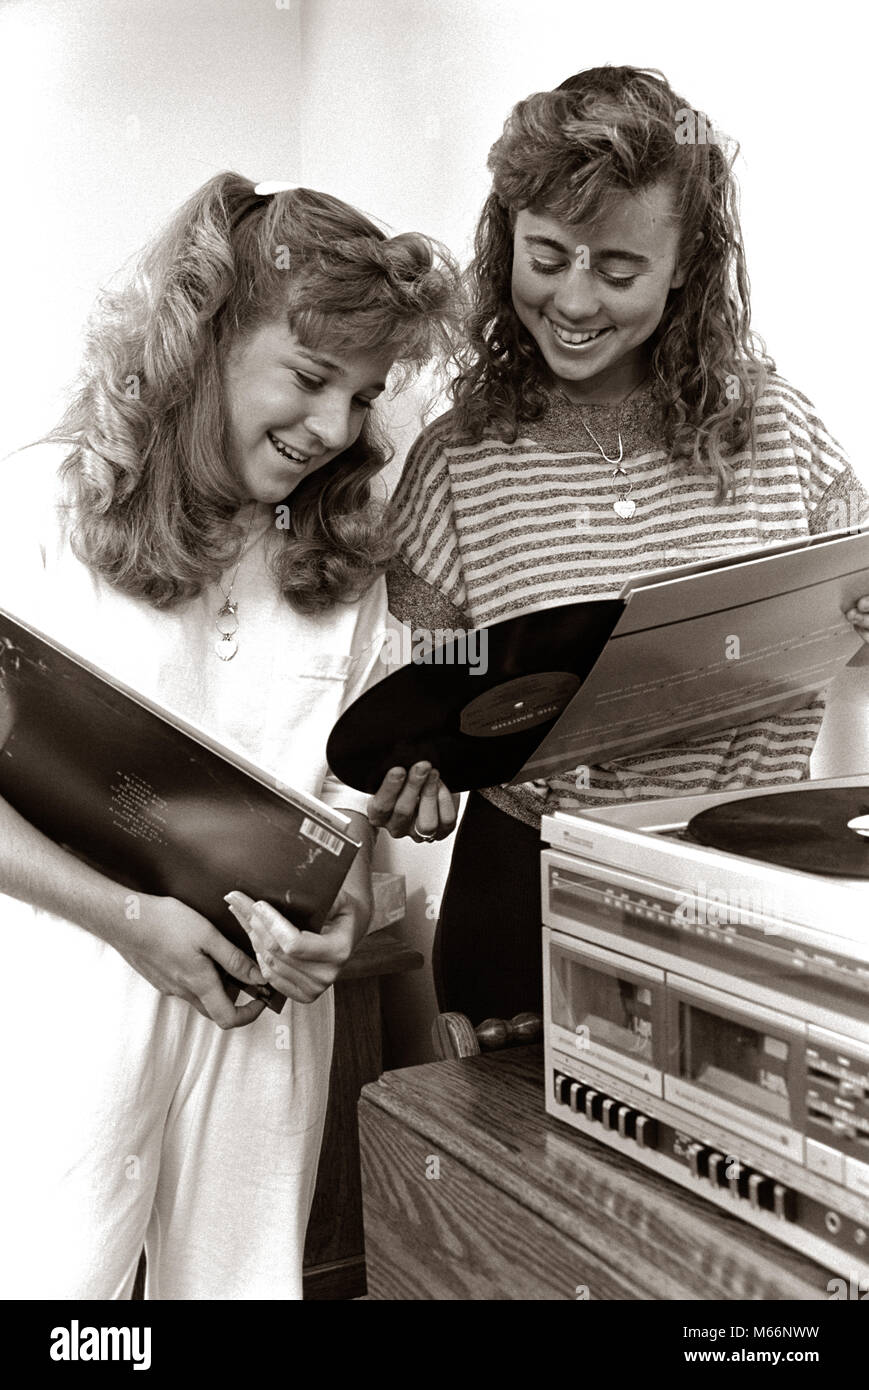 1980s 2 TEENAGE GIRLS READING VINYL RECORD ALBUM JACKET COVERS LISTENING TO LONG PLAYING PHONOGRAPH PLAYER - m11308 HAR001 HARS NOSTALGIA PLAYERS PHONOGRAPH TOGETHERNESS STEREO 13-15 YEARS 16-17 YEARS COOPERATION COMMUNICATE SLEEVES TEENAGED LP JUVENILES ALBUMS B&W BLACK AND WHITE CAUCASIAN ETHNICITY JACKETS OLD FASHIONED PERSONS RECORDINGS Stock Photo